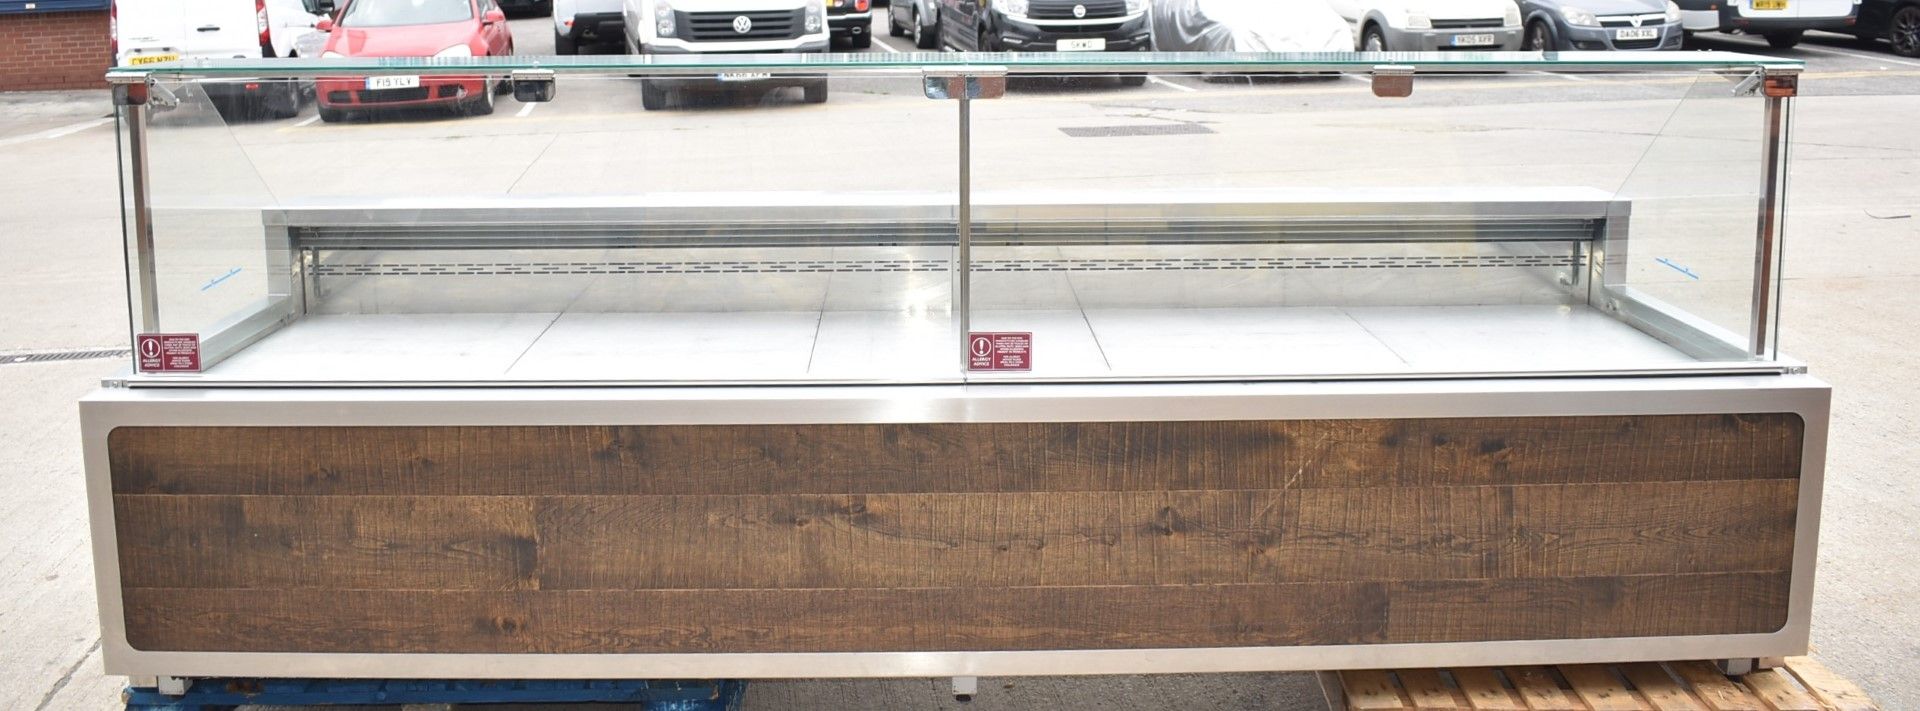 1 x Eurocryor Bistro Refrigerated Retail Counter - Suitable For Takeaways, Butchers, Deli, Cake - Image 6 of 28